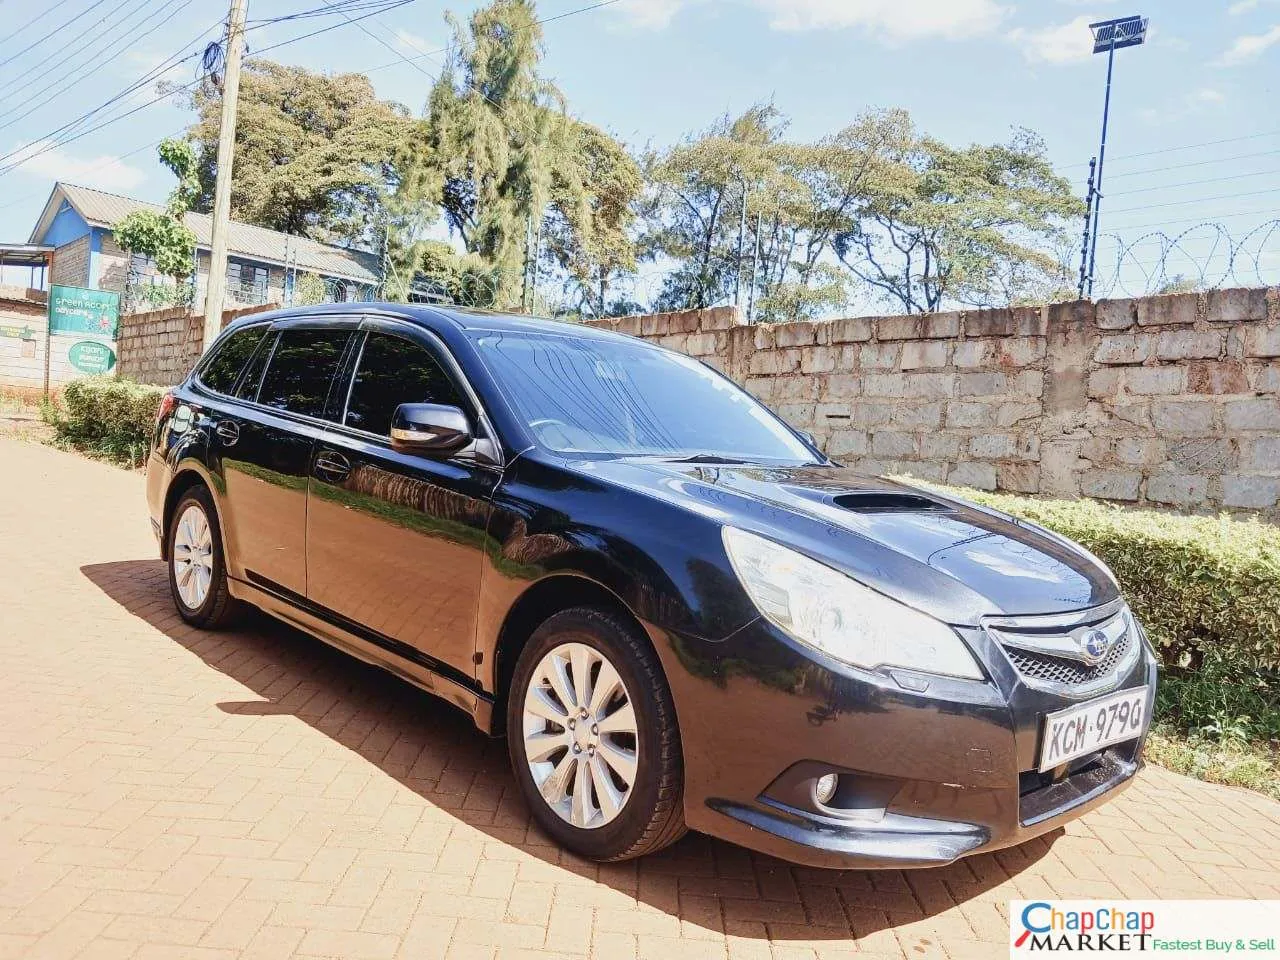 Legacy for sale in kenya you pay 30% DEPOSIT hire purchase installments EXCLUSIVE Subaru legacy